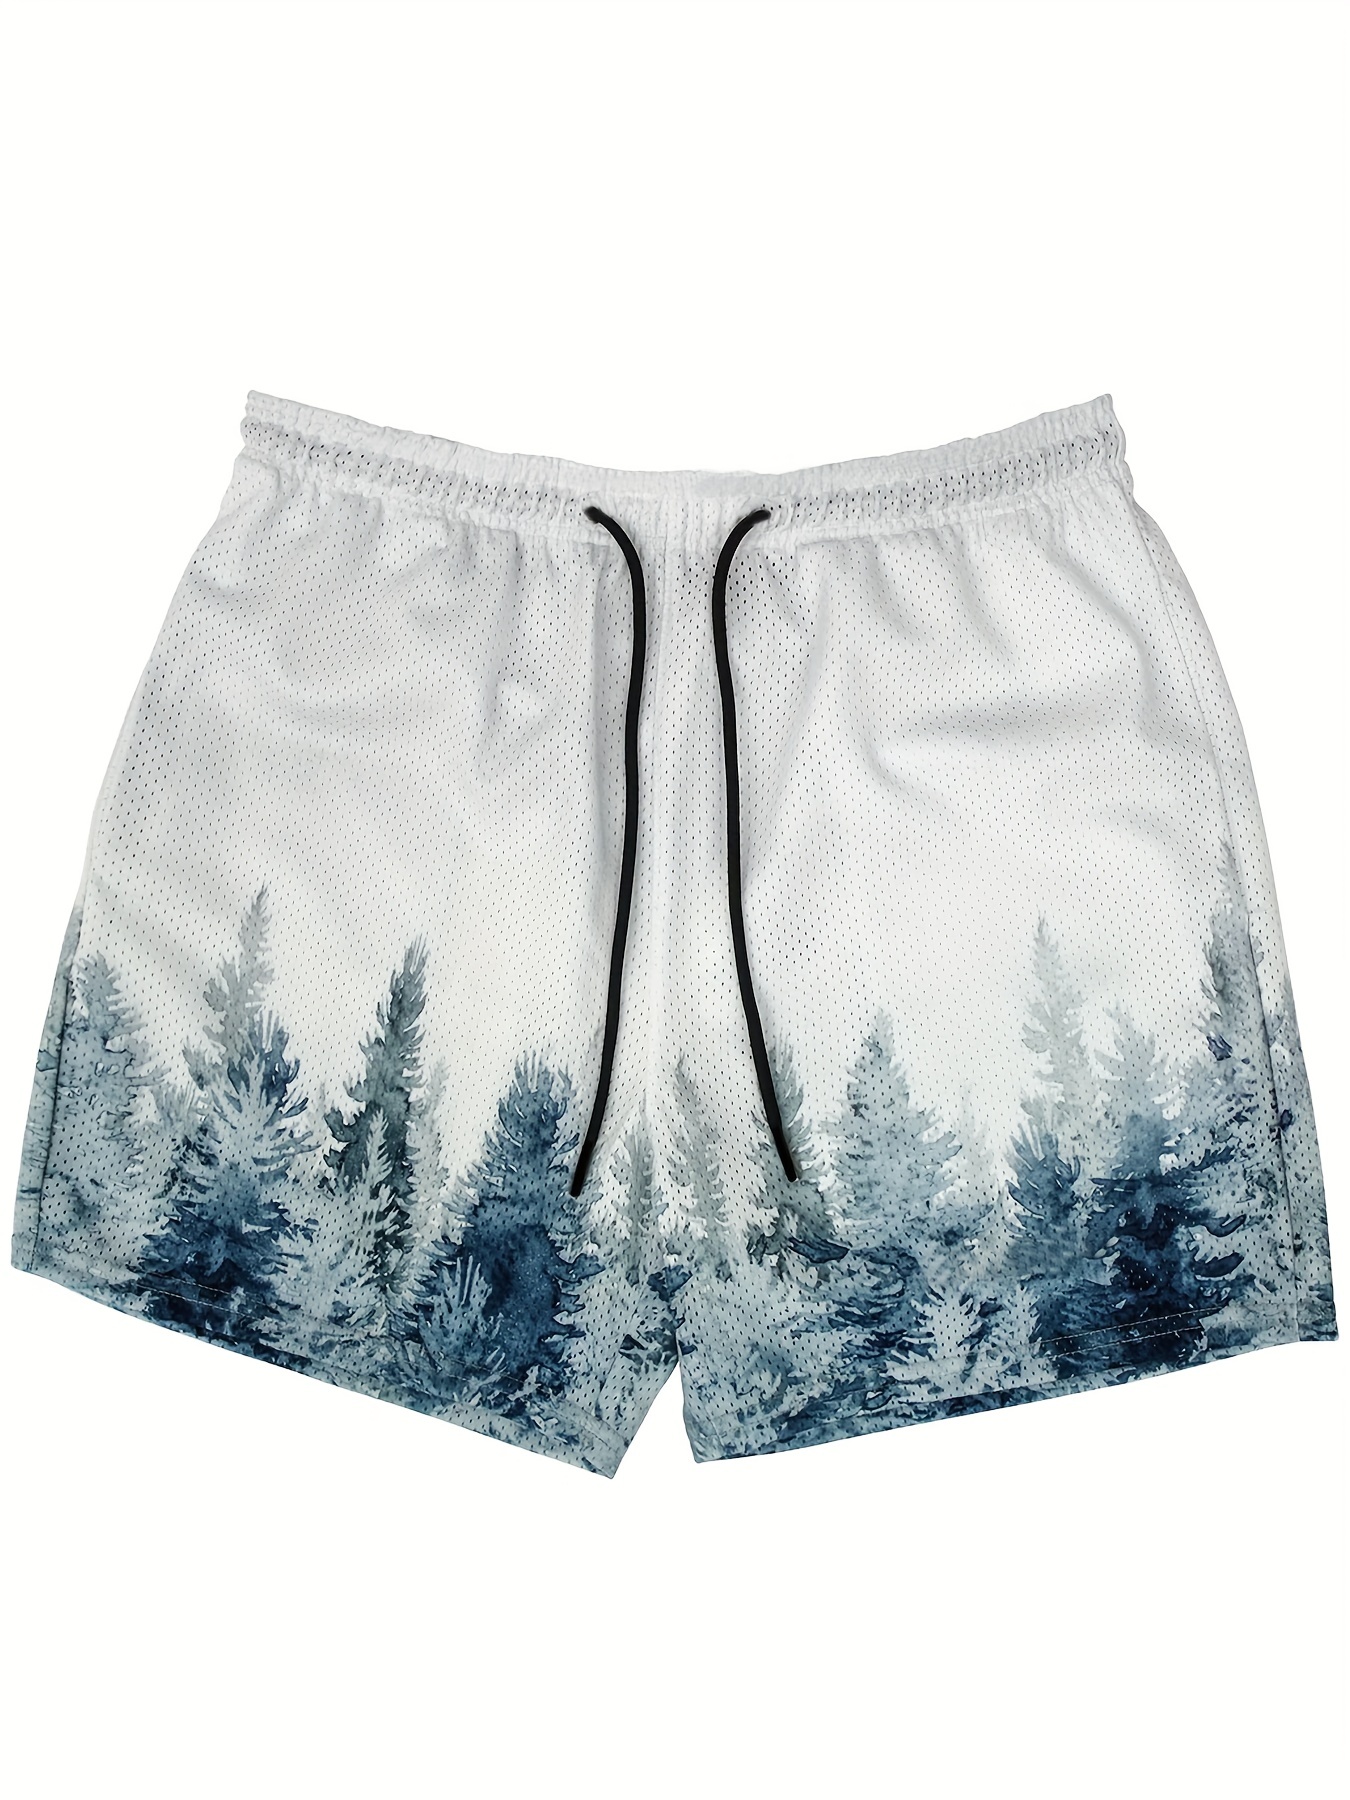 Men's Graphic Print Quick Dry Loose Shorts, Active Slightly